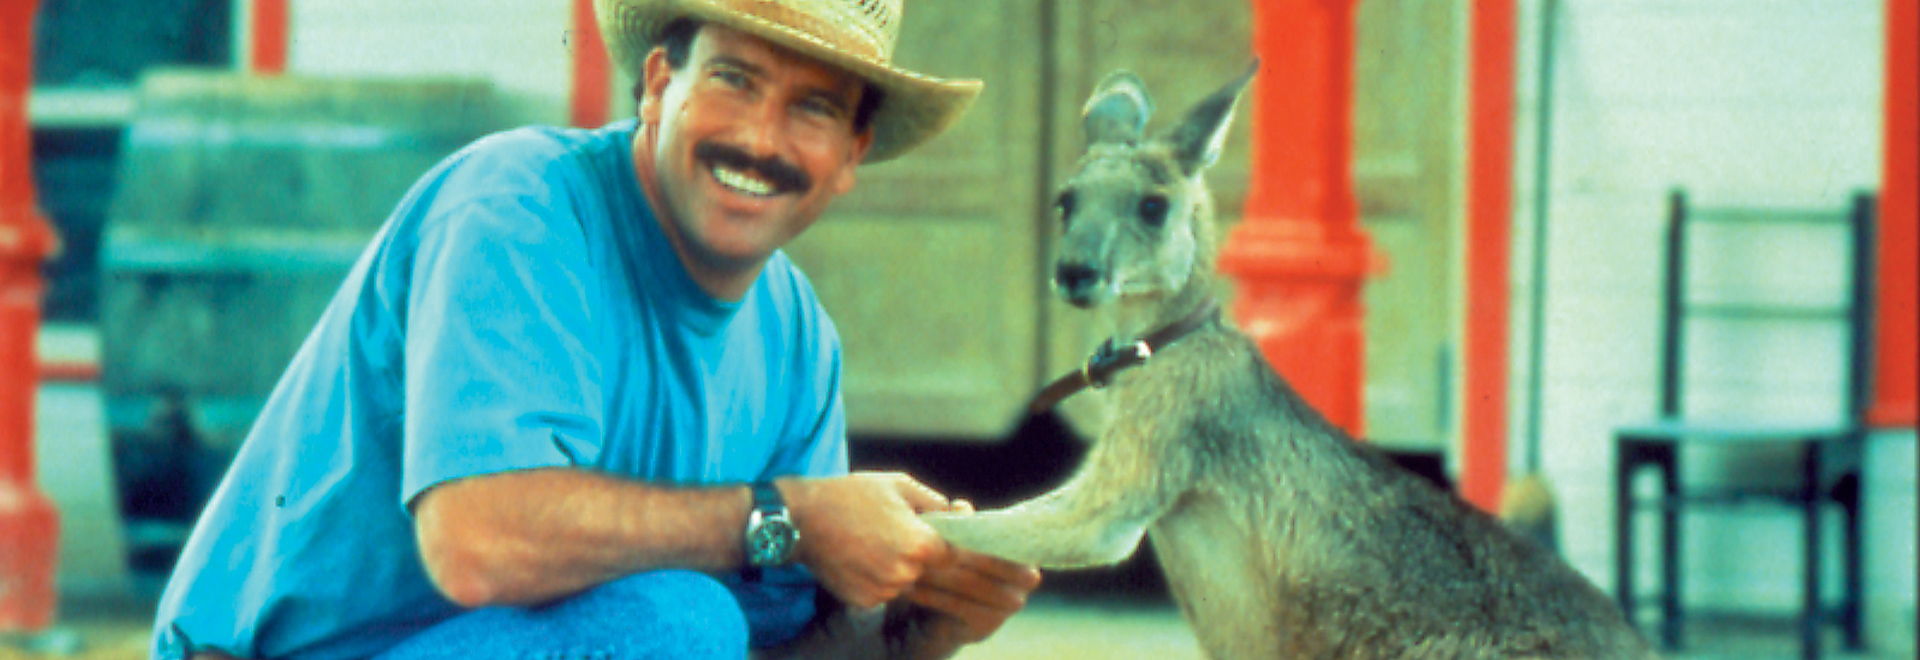 The Adventures Of Skippy - Hop to it to take home this much-loved Aussie icon